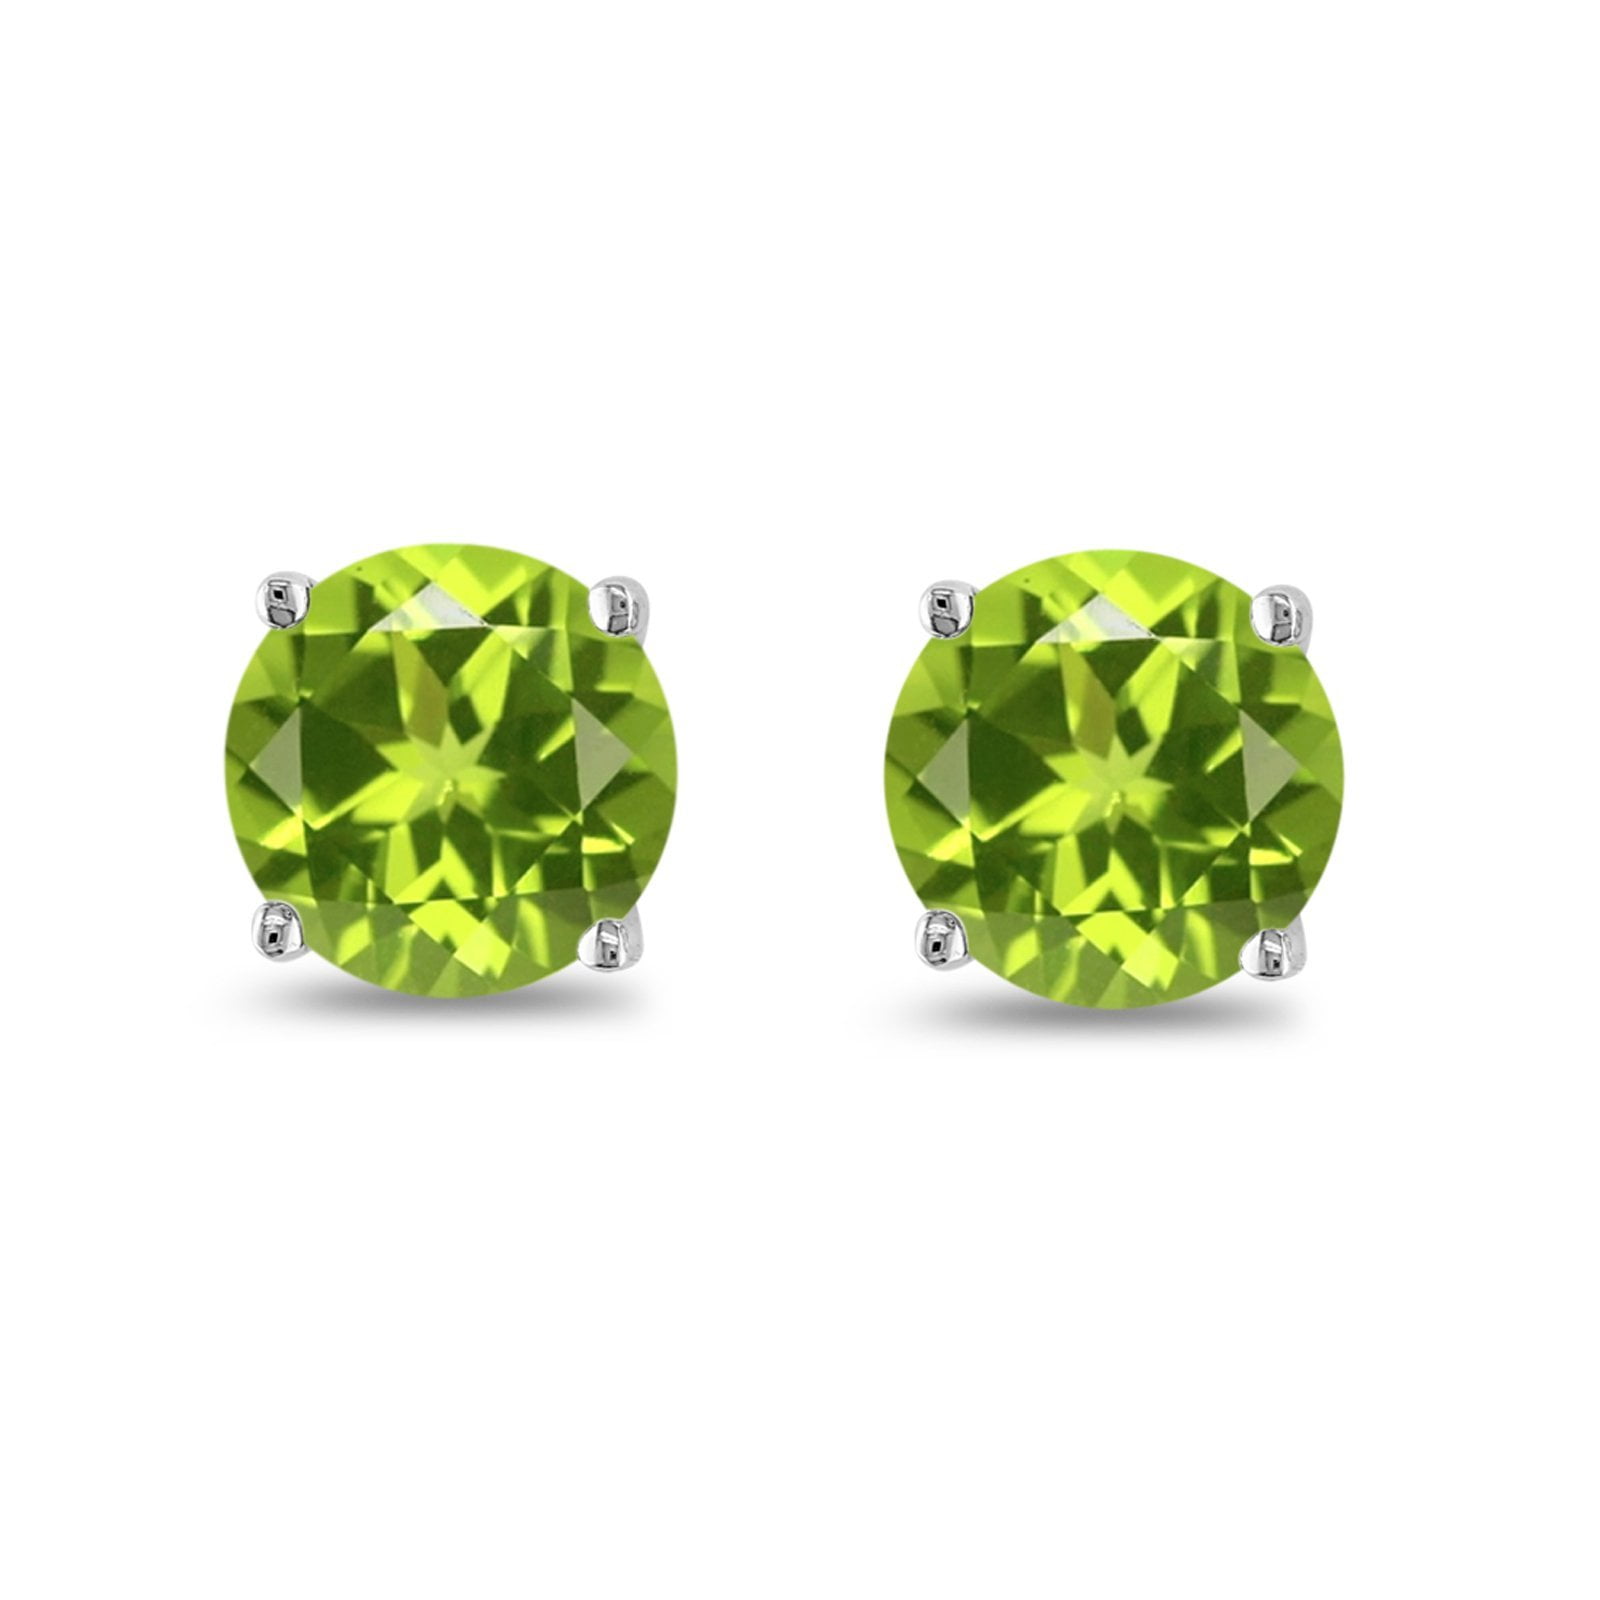 14k White Gold 7x5mm Green Peridot Post Stud Earrings Birthstone August Gemstone Fine Jewelry For Women Gifts For Her 